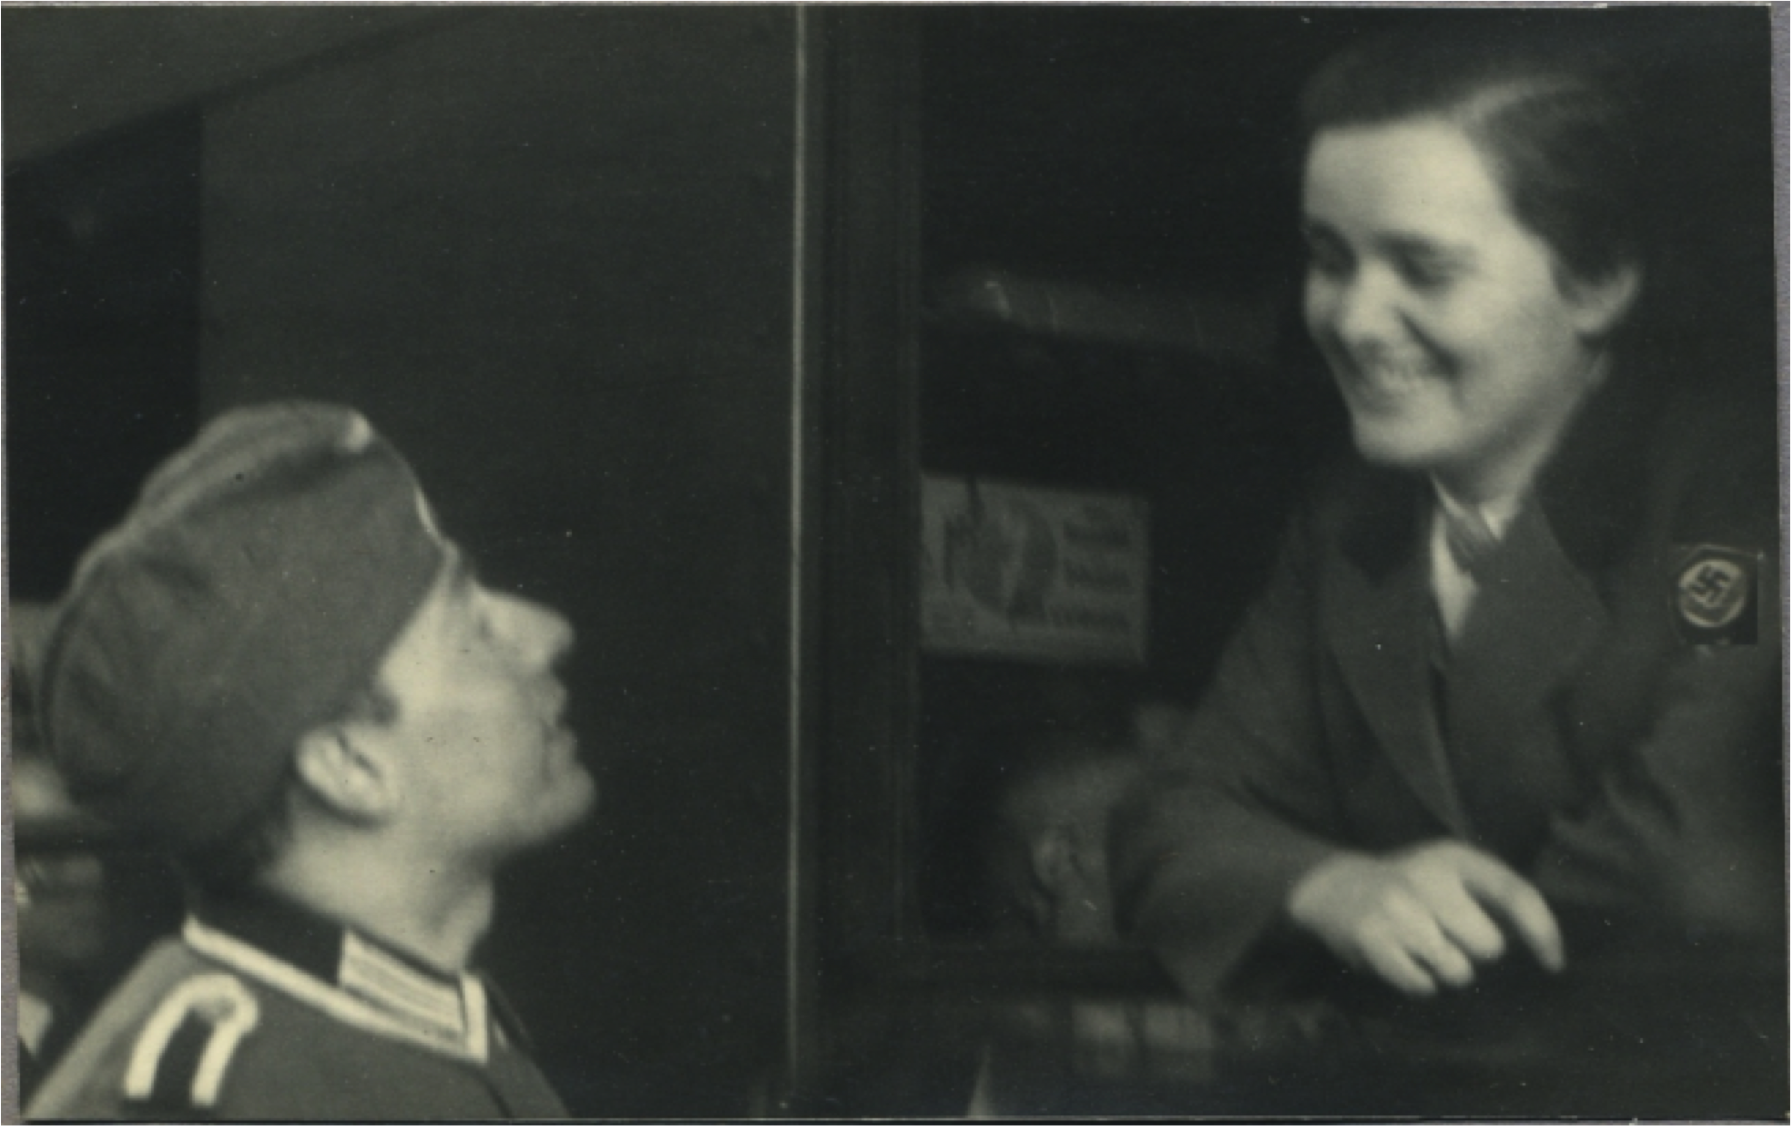 Alf Eger looking proudly at his bride Gritt on a German train, 1941.